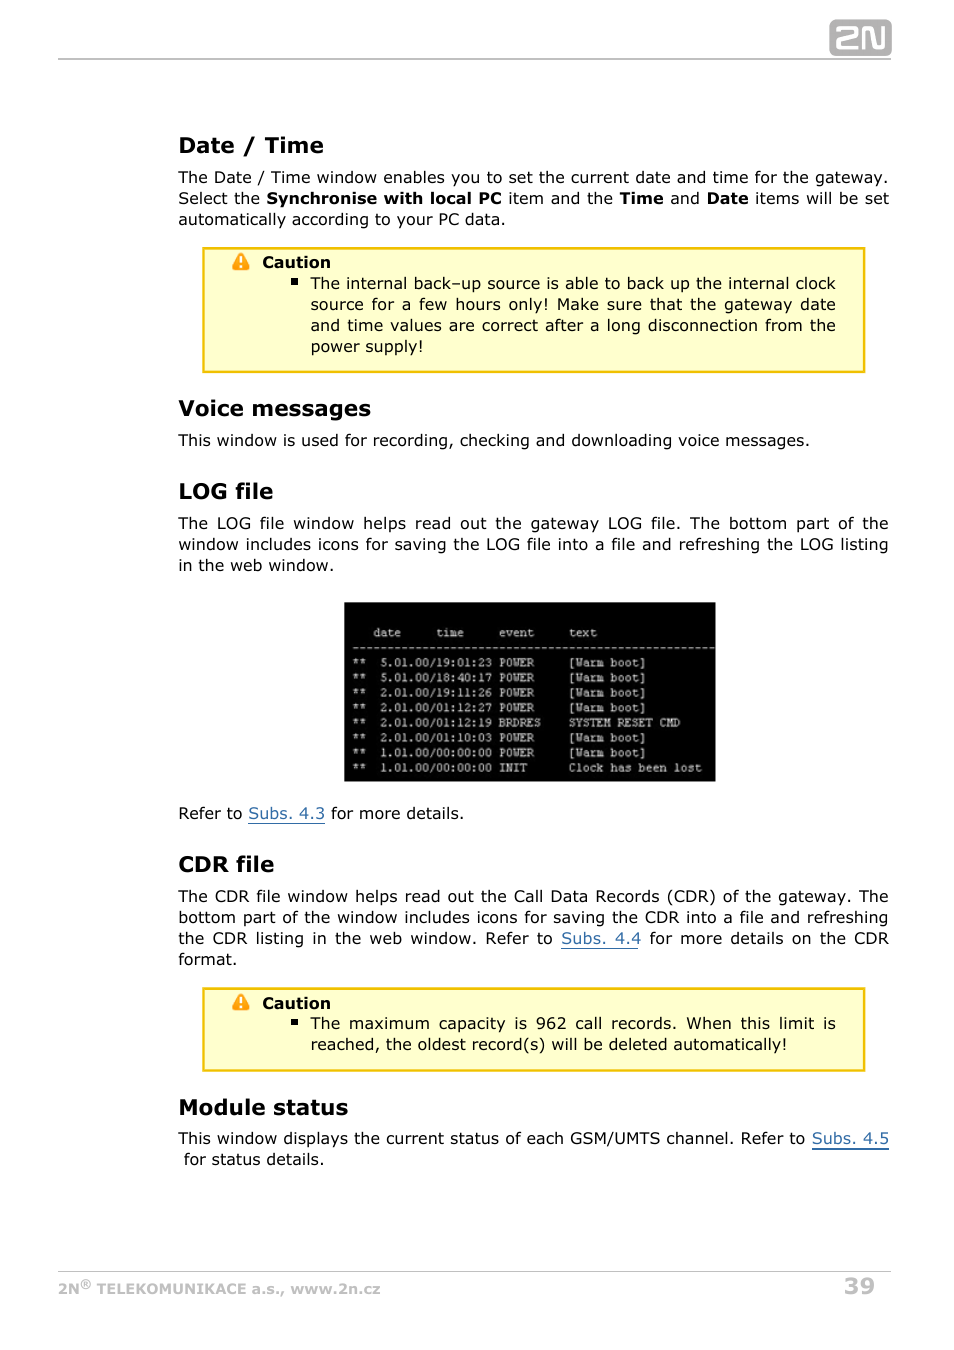 Date / time, Voice messages, Log file | Cdr file, Module status | 2N VoiceBlue MAX v1.1 User Manual | Page 39 / 104